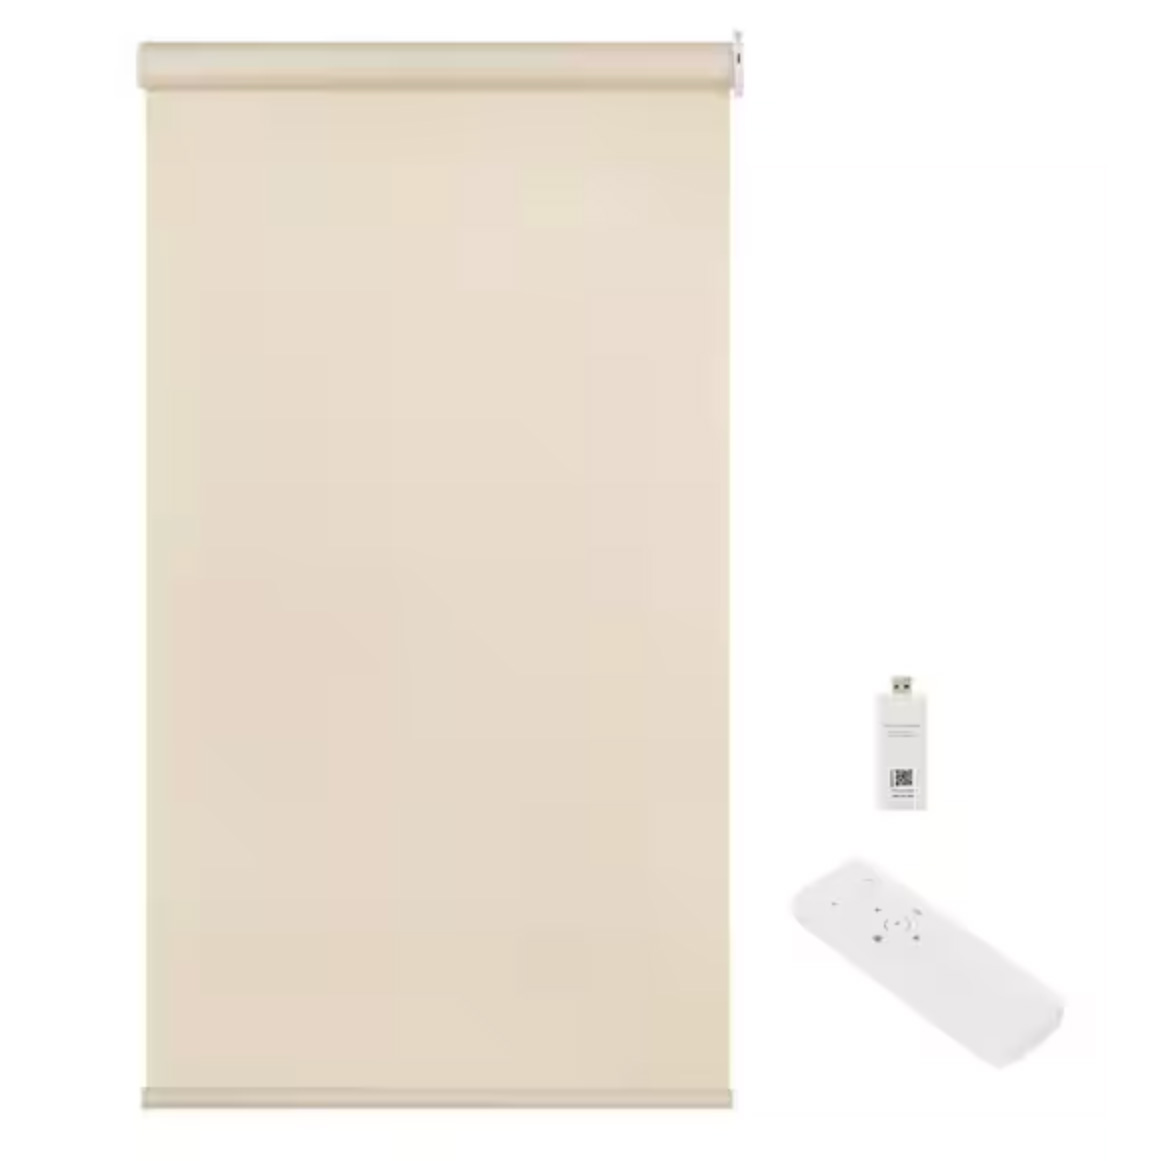 Cream colored smart roller shades with remote and USB connecter